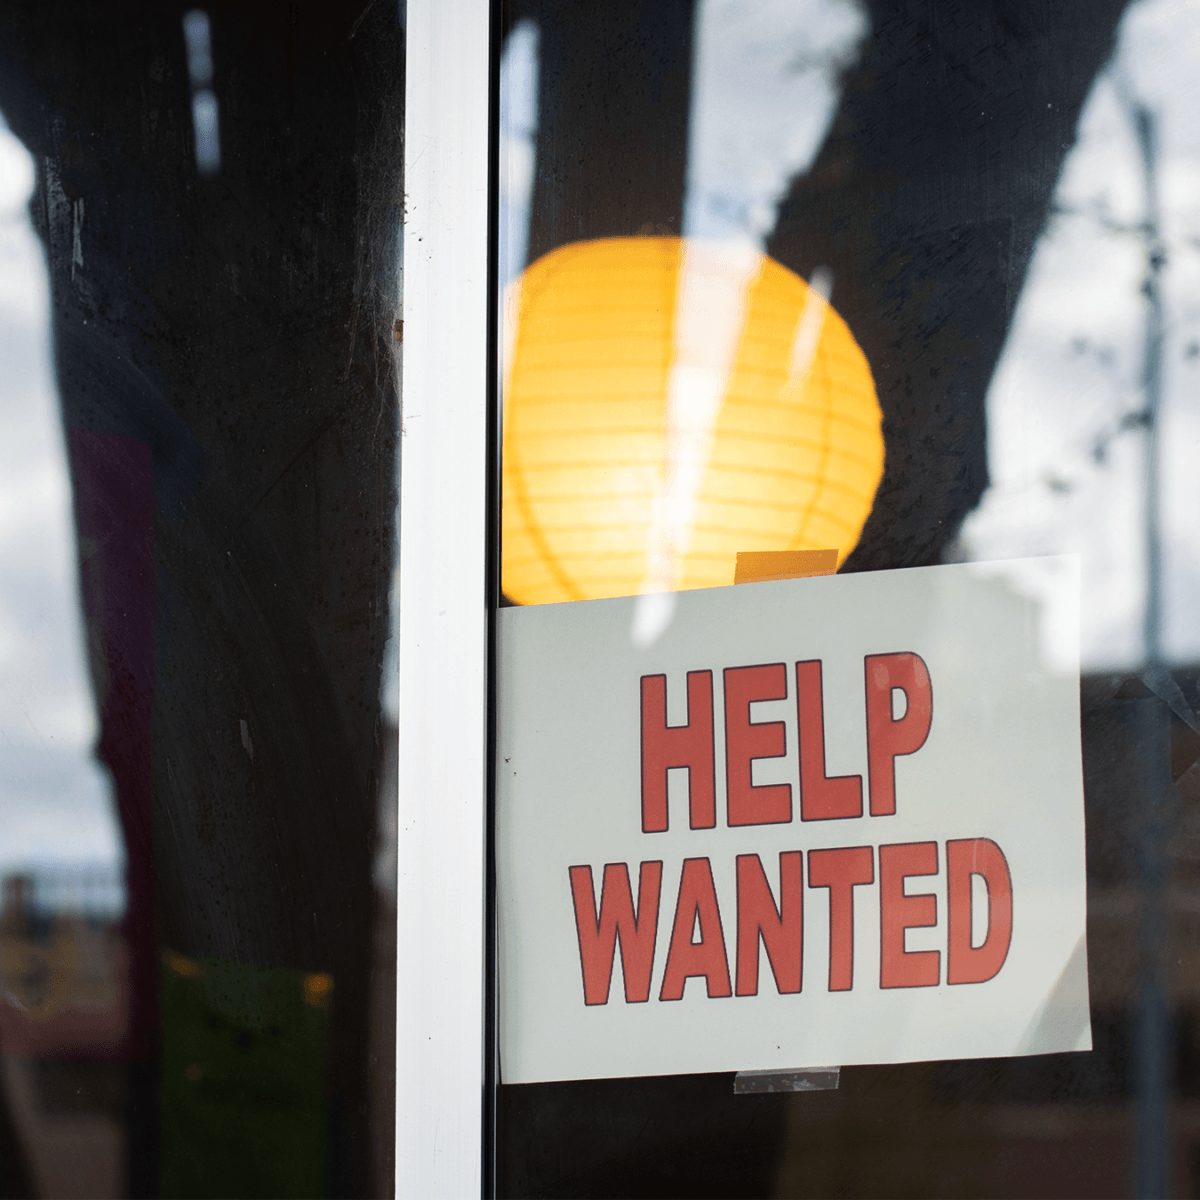 A 'help wanted' sign hangs in the window of a restaurant